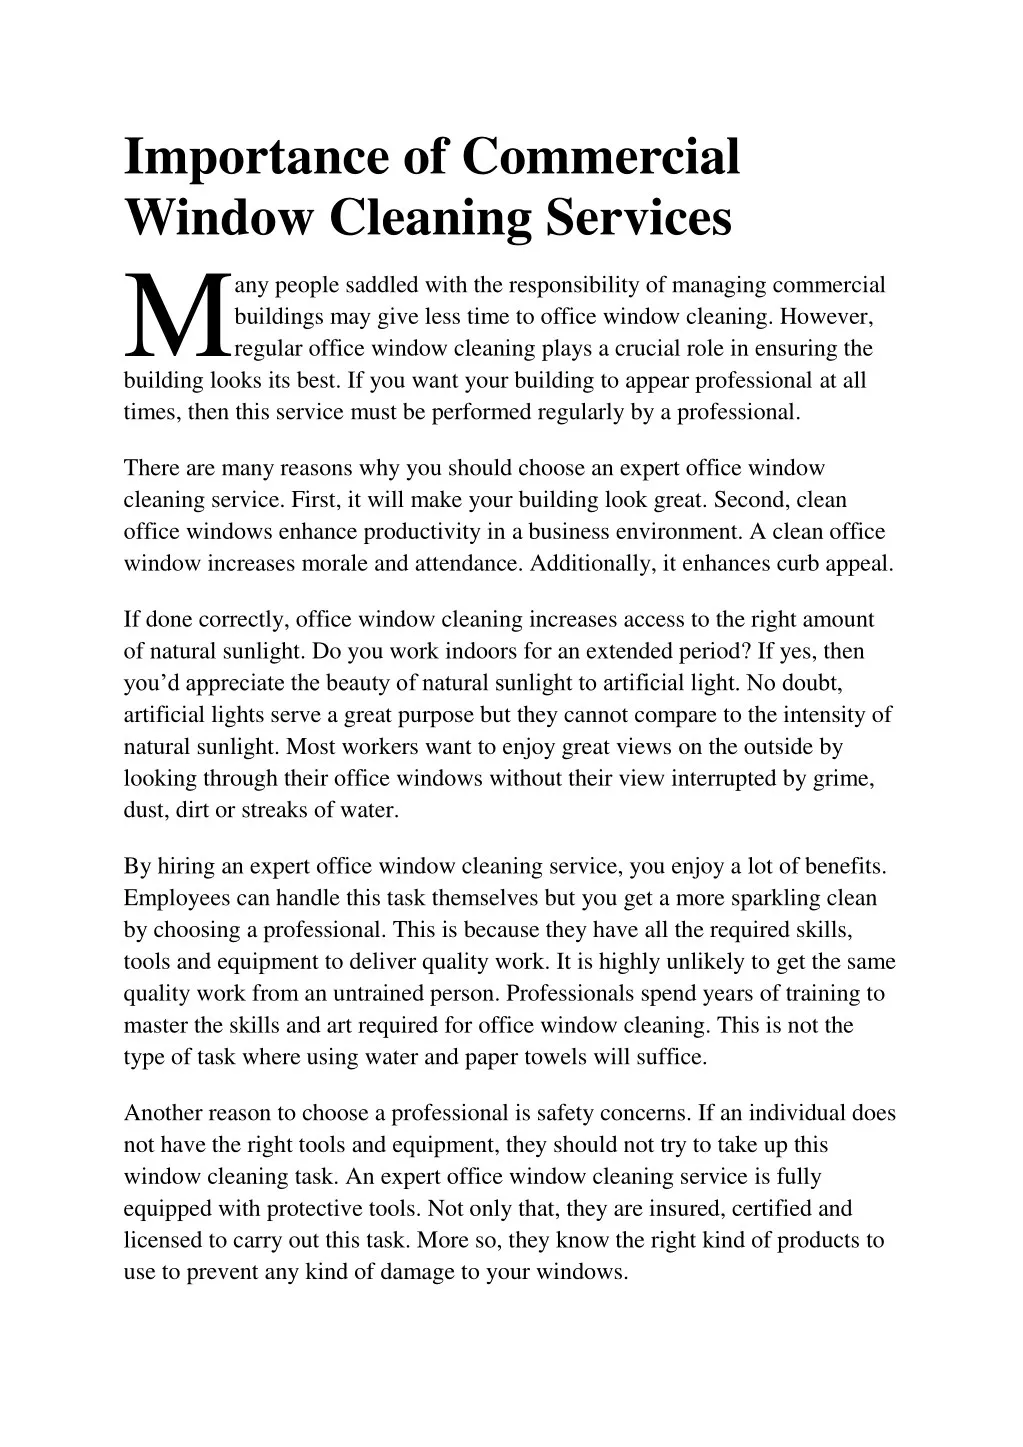 importance of commercial window cleaning services